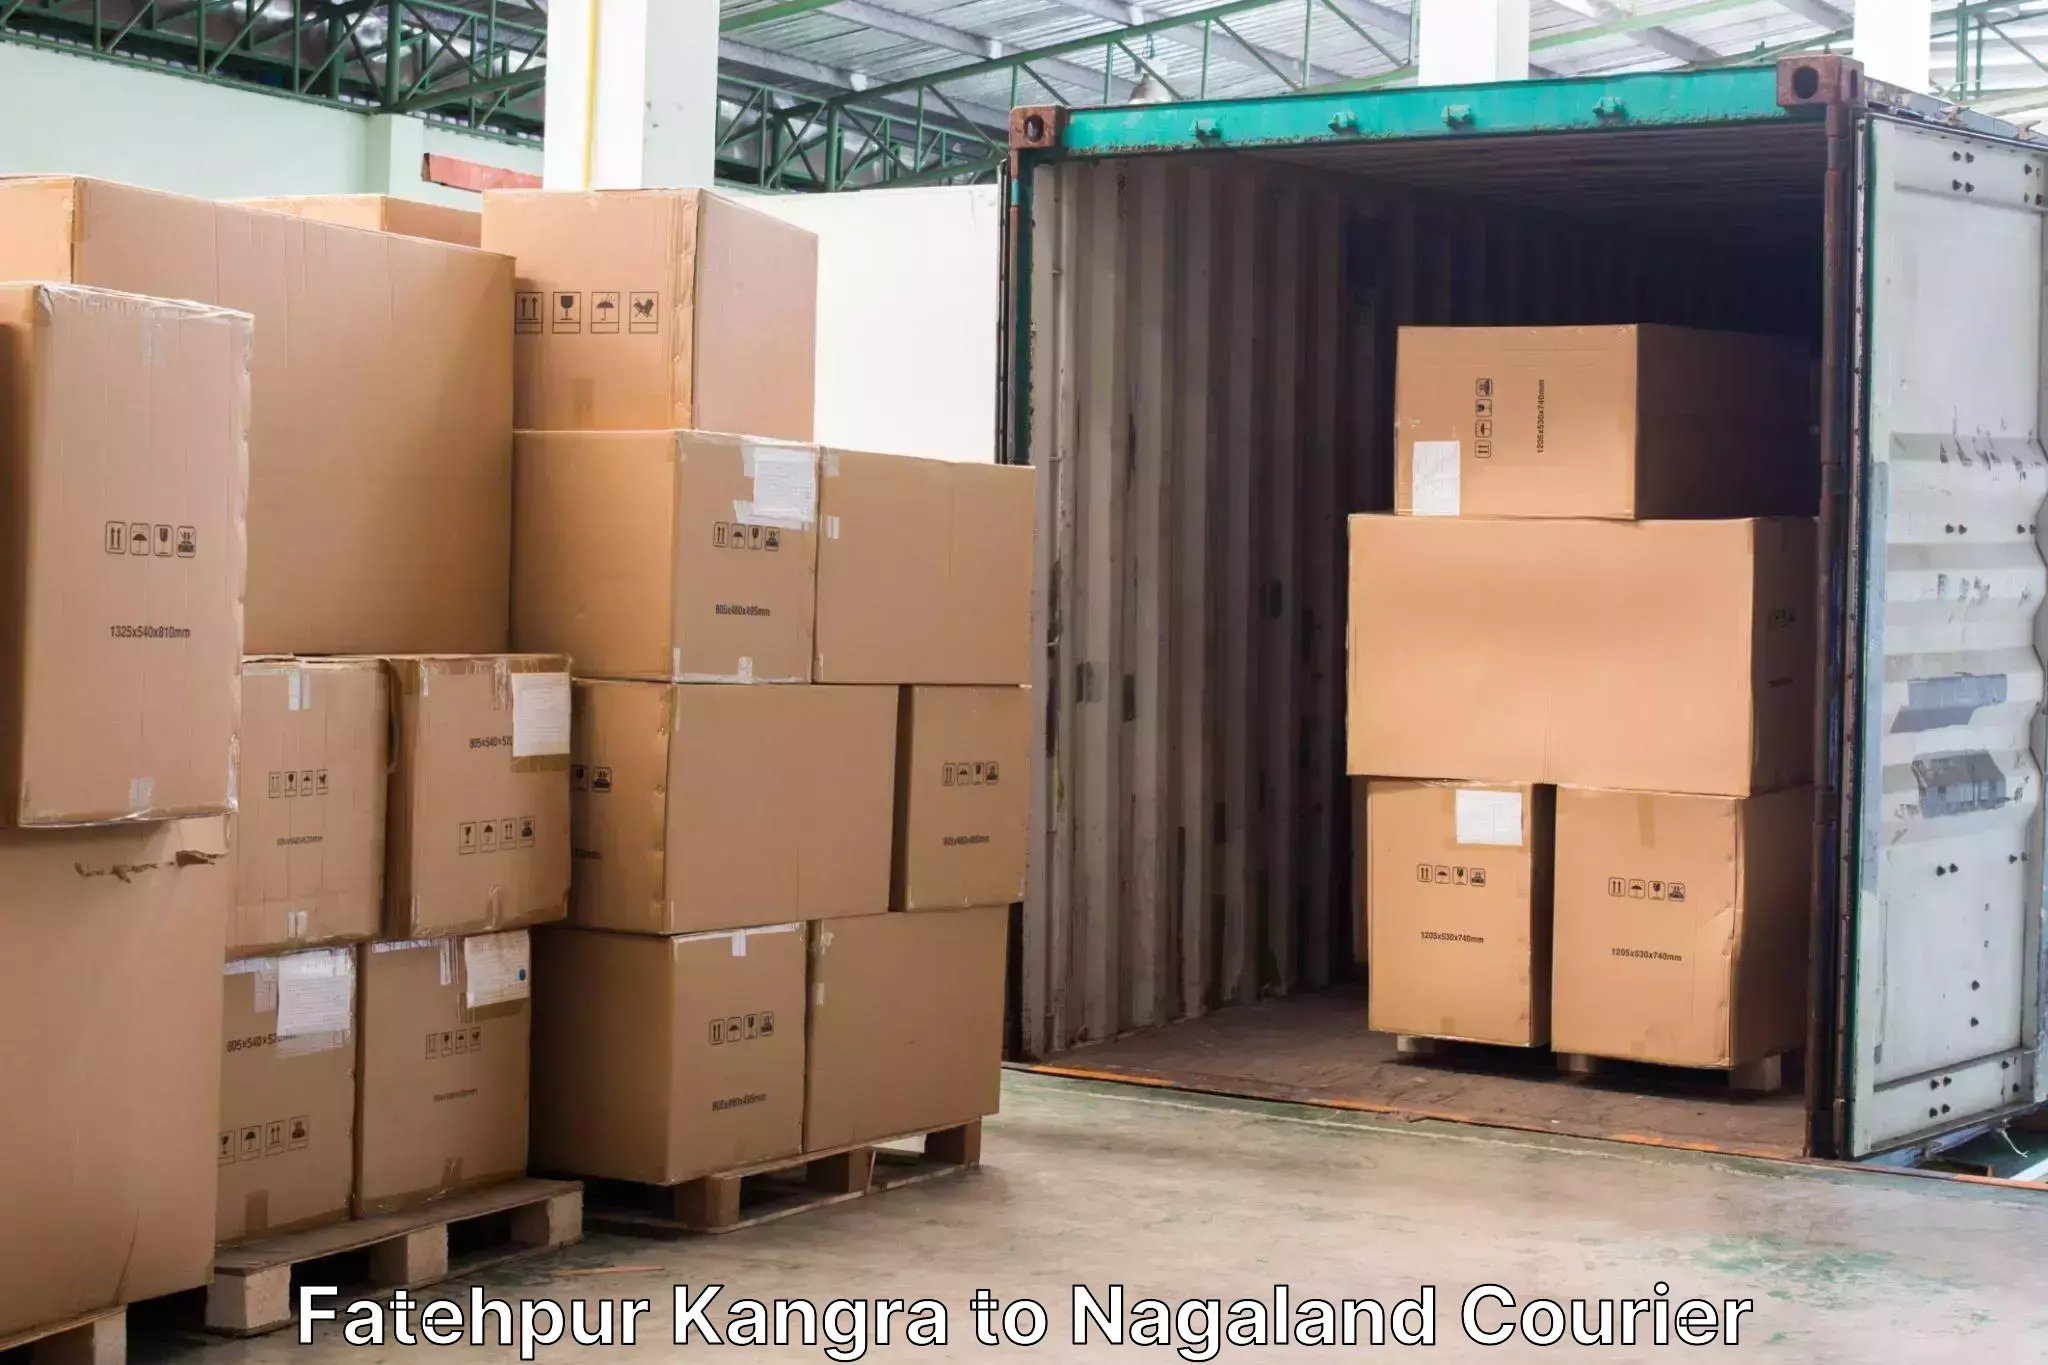 Luggage delivery system Fatehpur Kangra to Dimapur